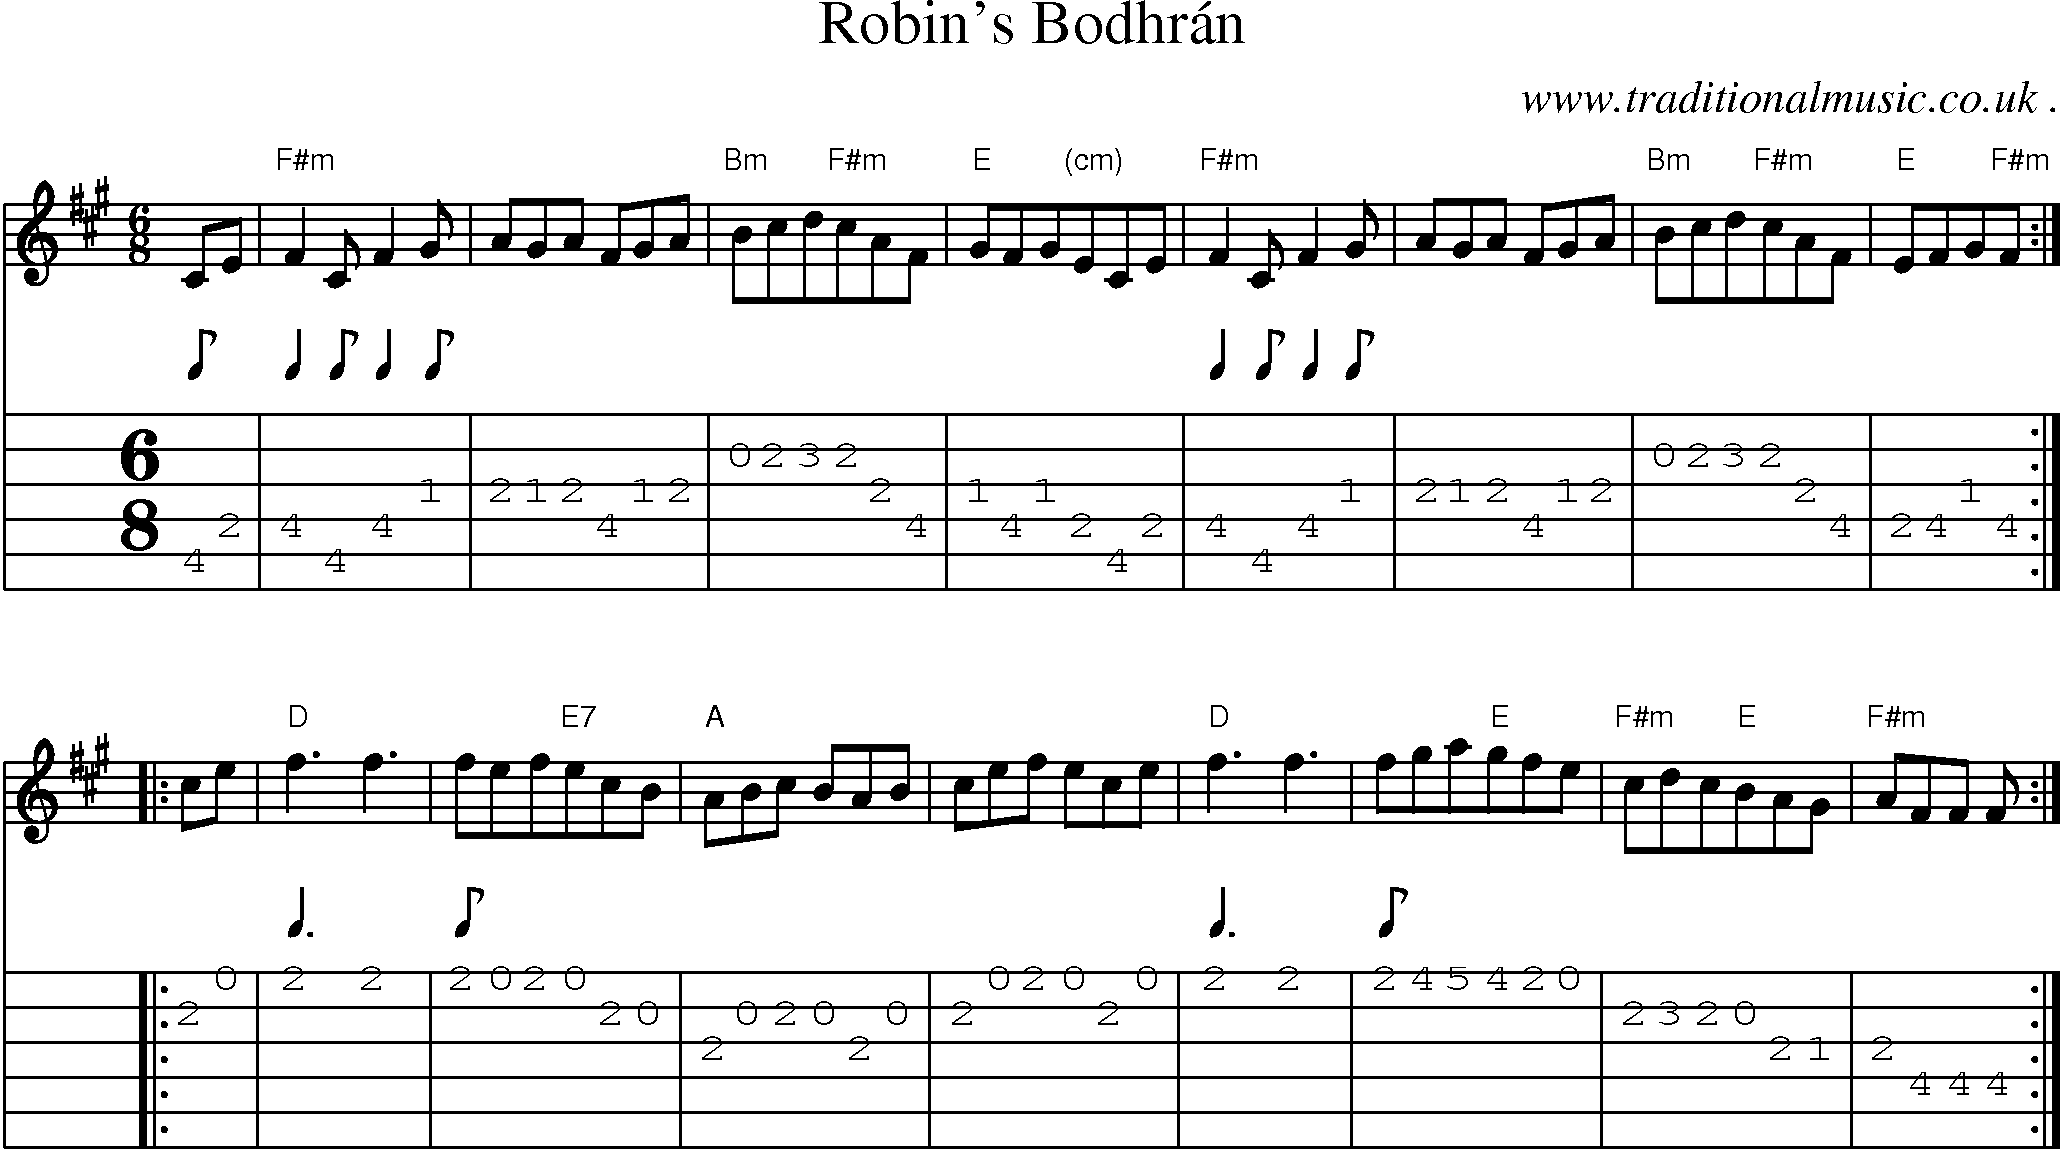 Sheet-Music and Guitar Tabs for Robins Bodhran